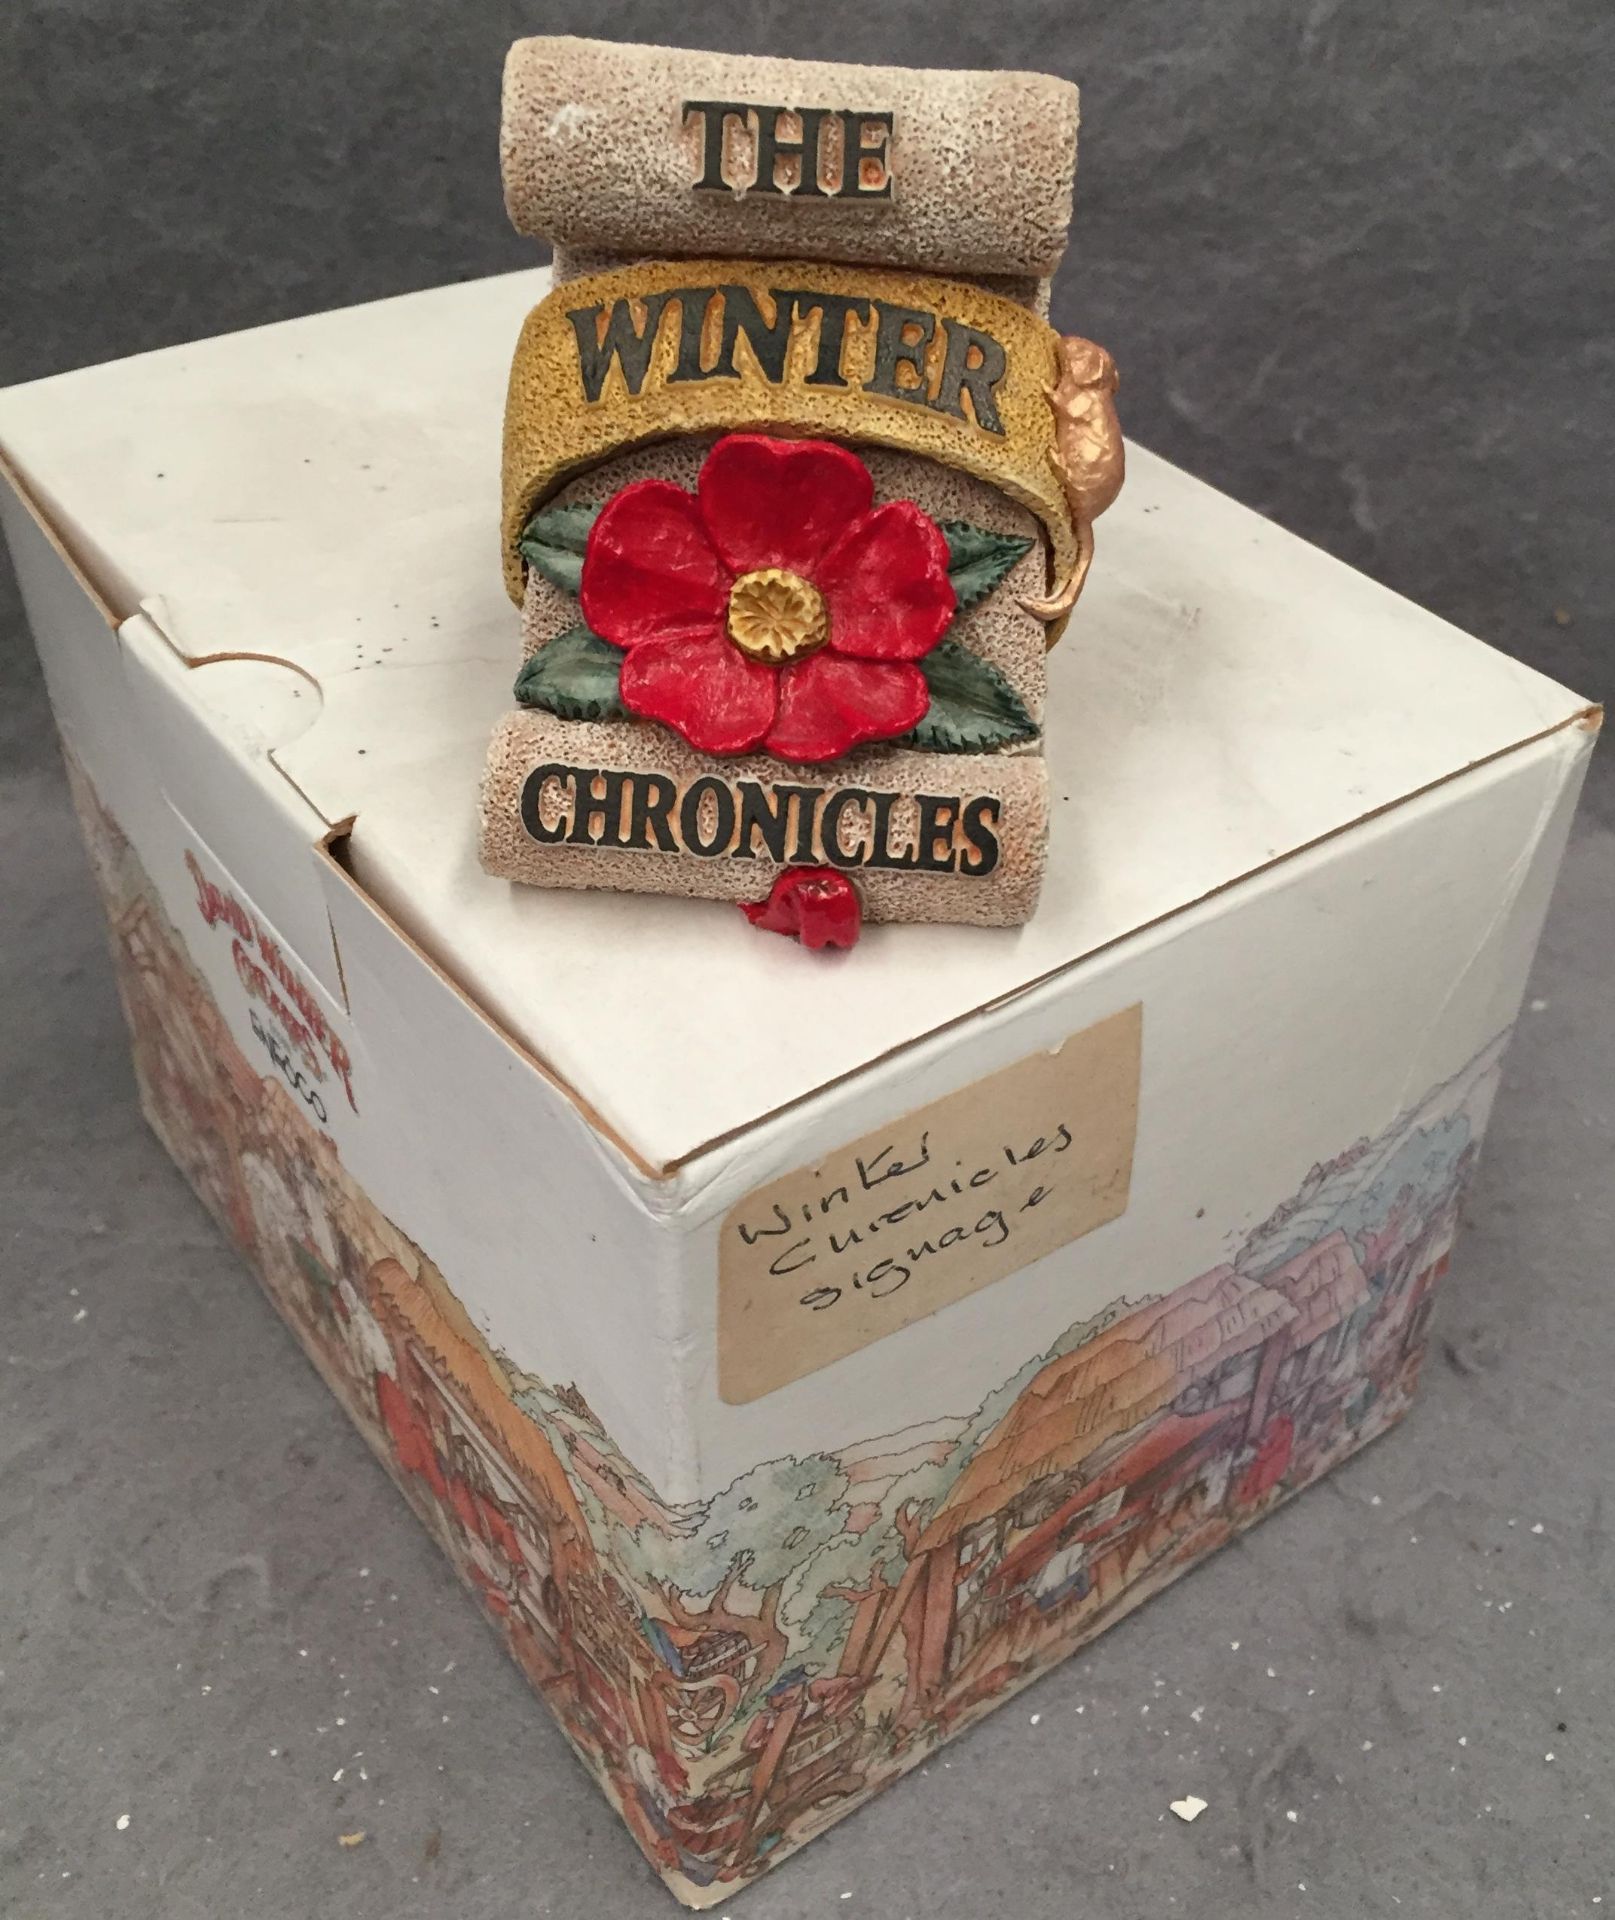 David Winter - Winter Chronicles signage height approx 55mm with box